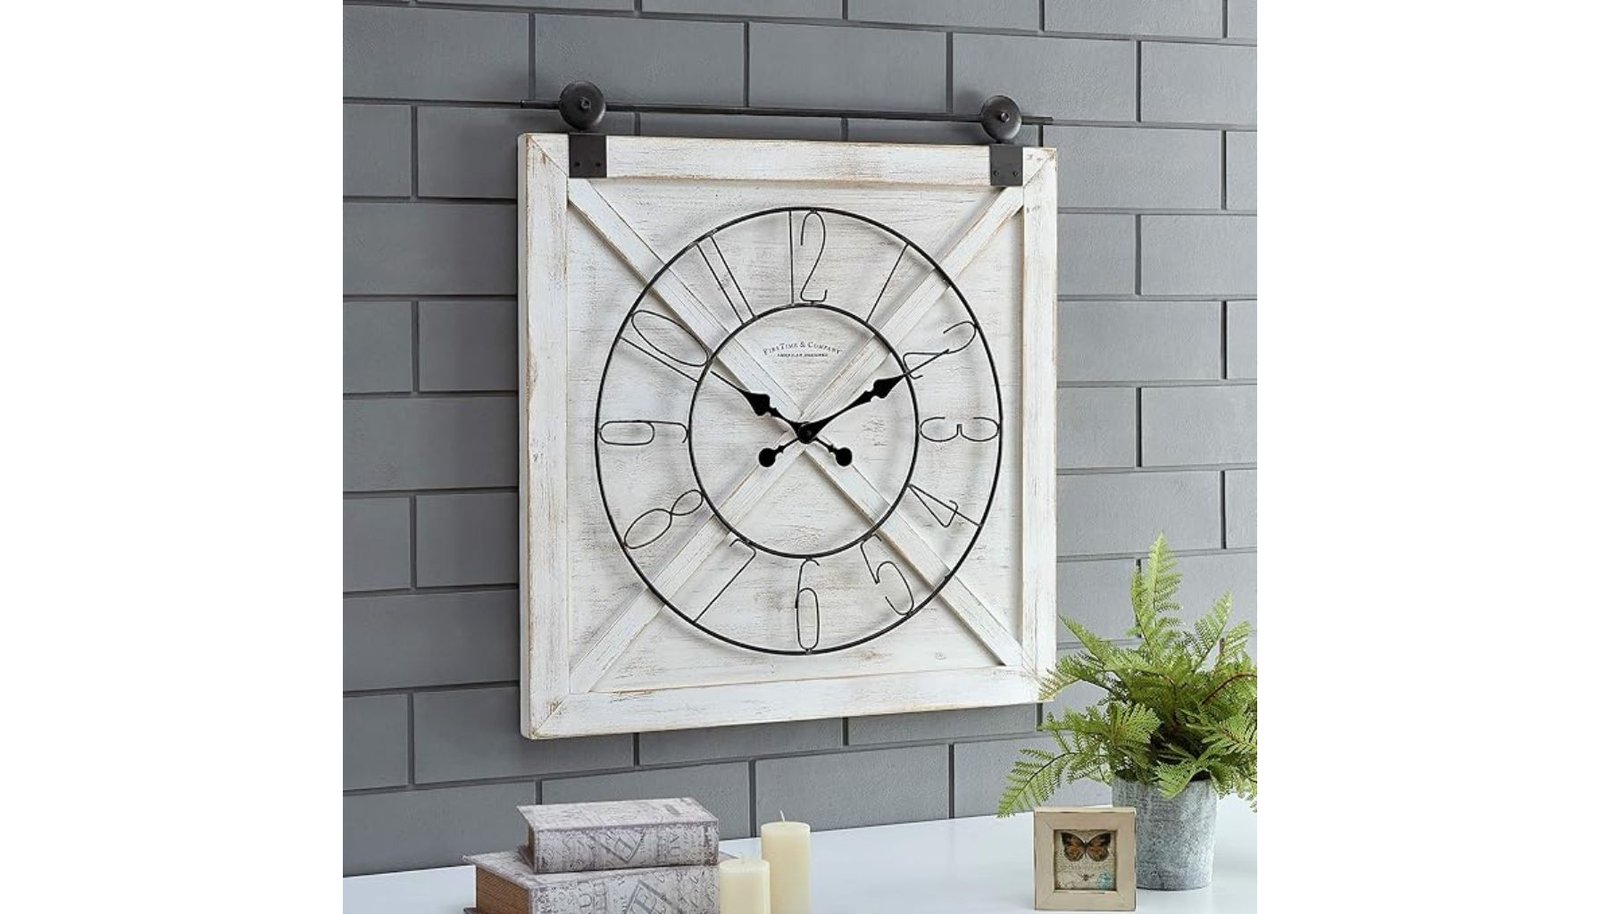 FirsTime & Co. White Farmstead Barn Door Living Room Wall Clock Review